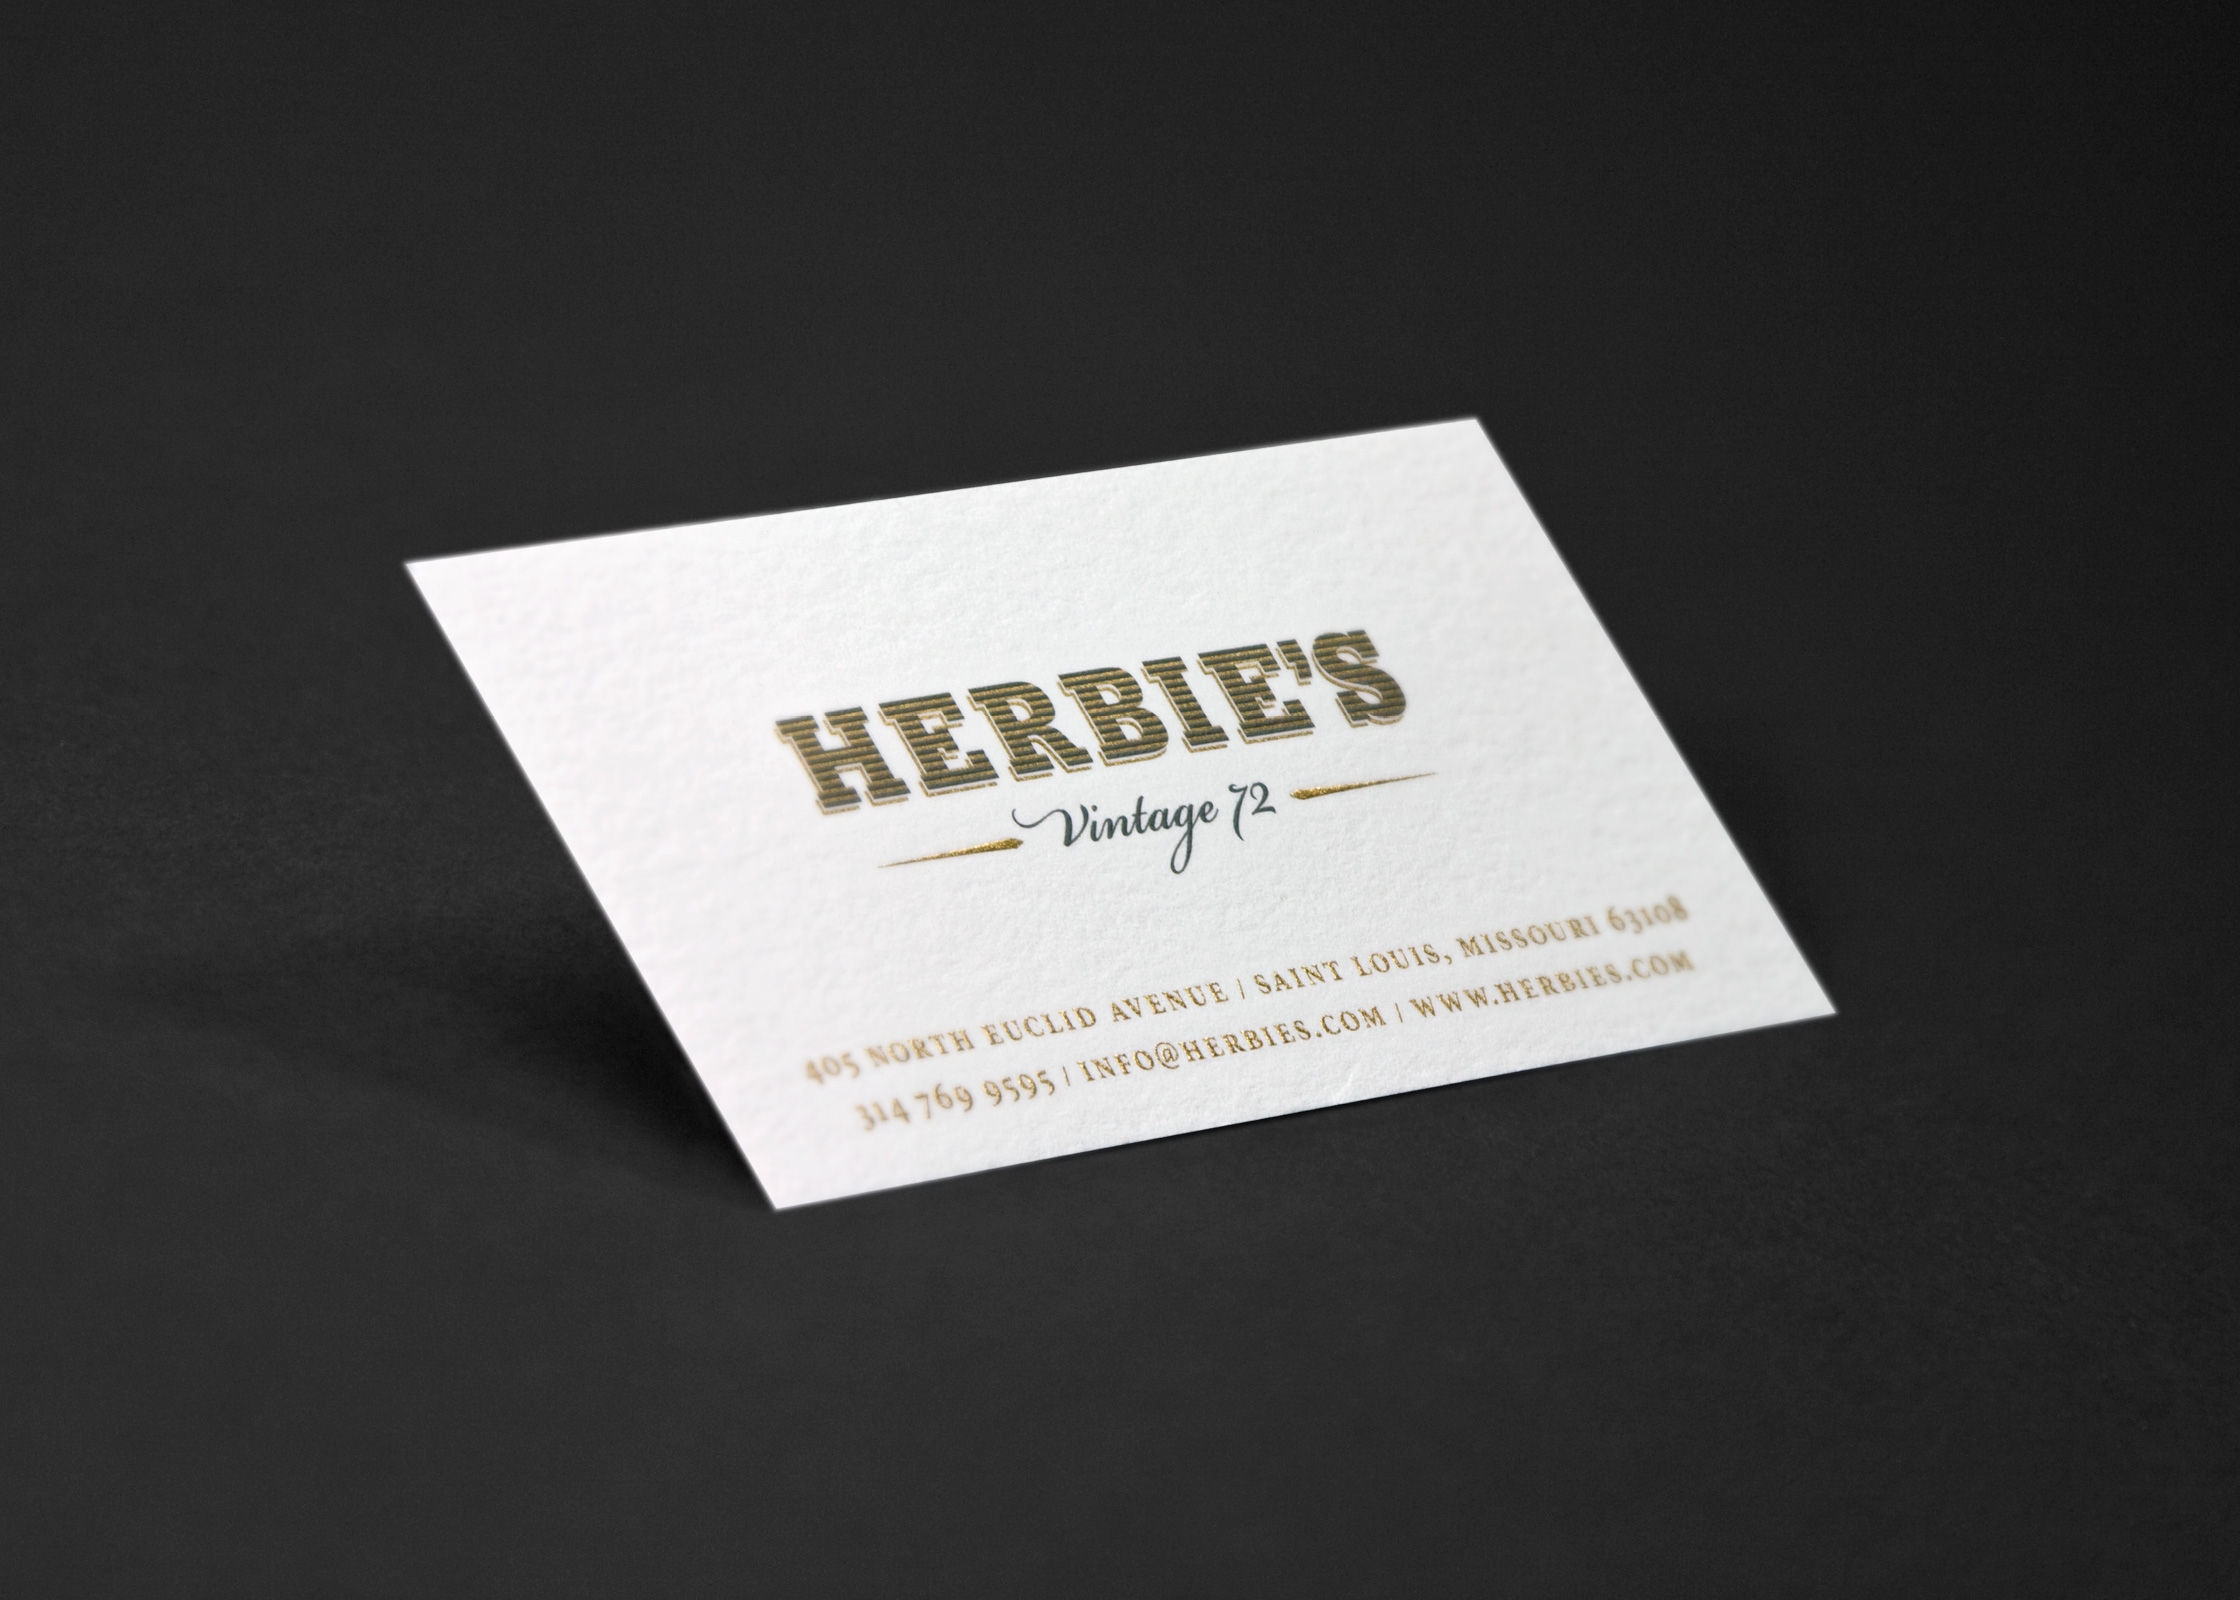 Branded business card for restaurant; Herbie's French American Bistro.